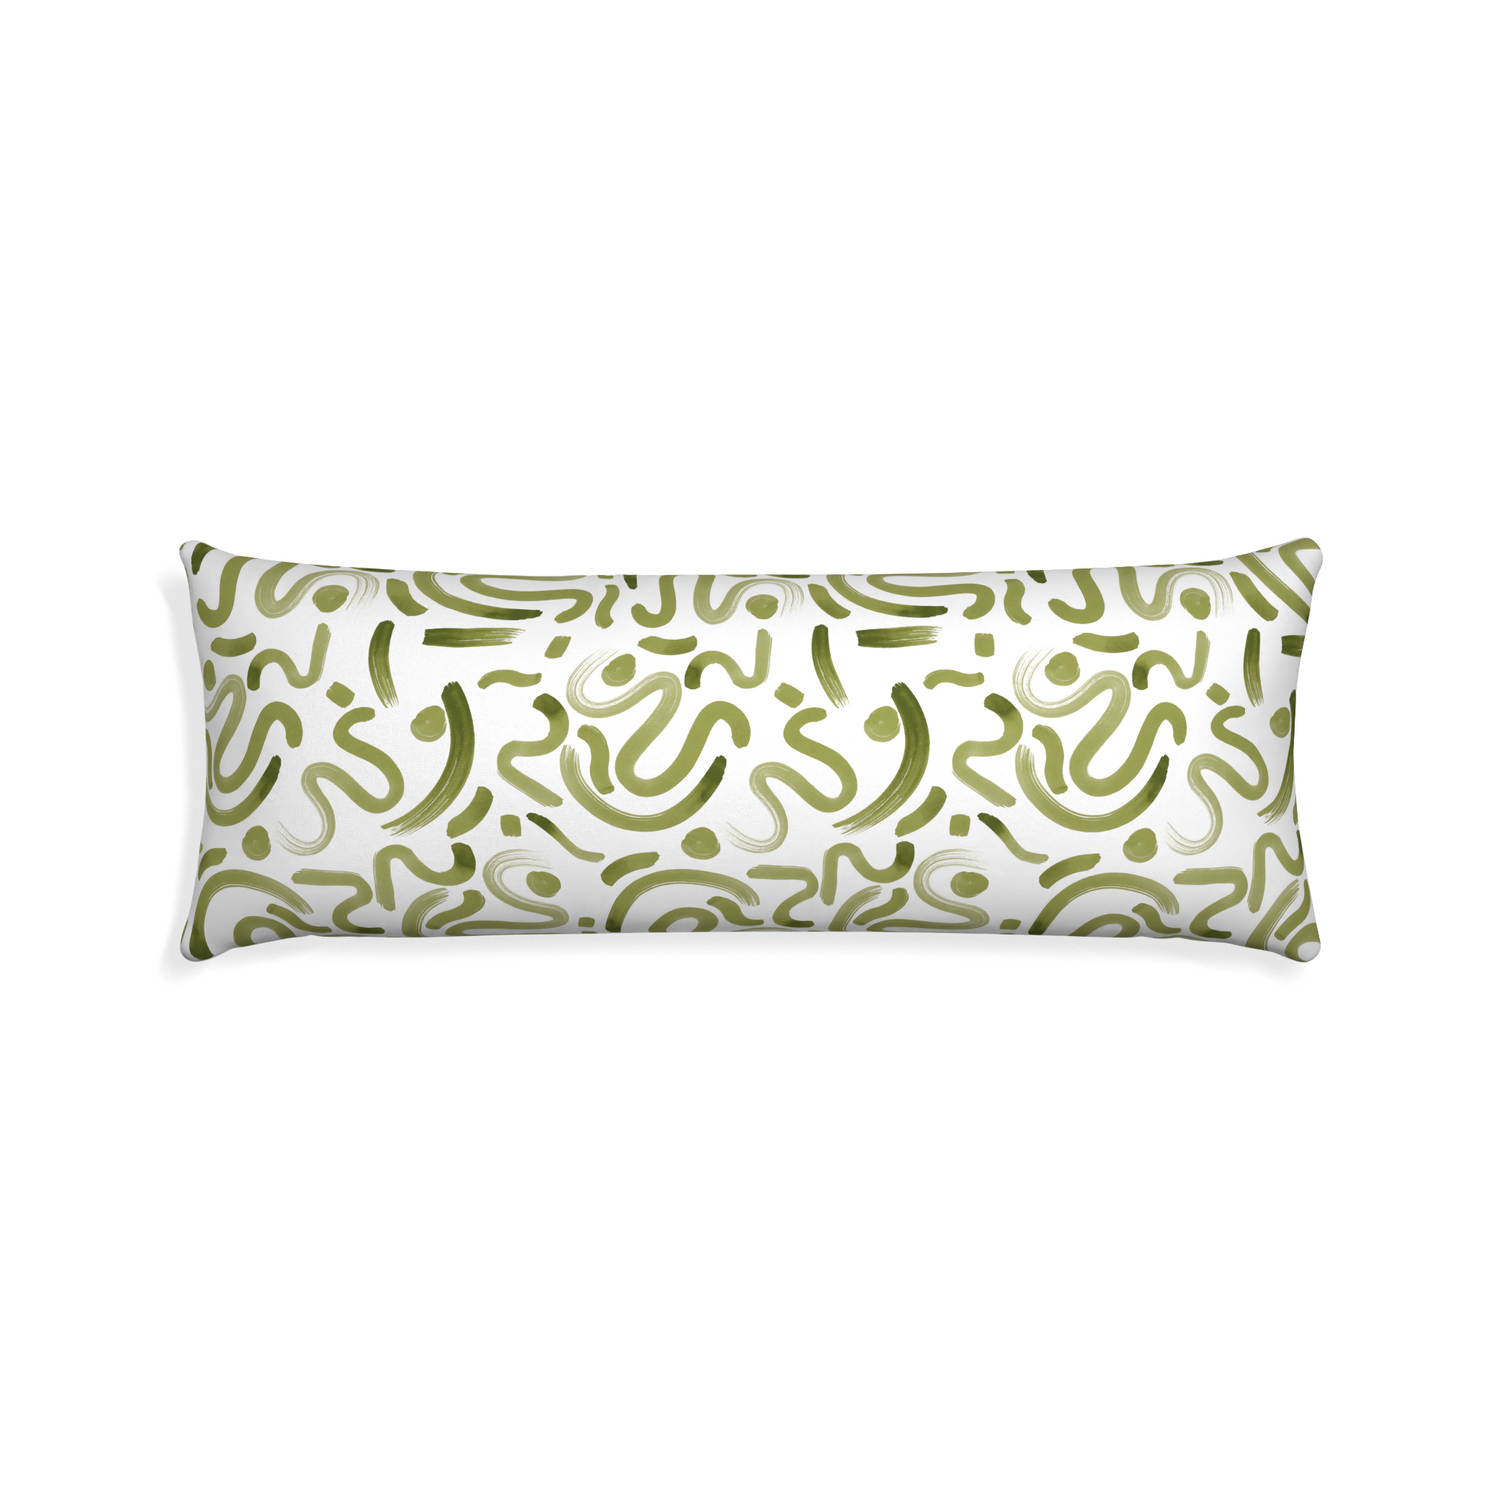 Xl-lumbar hockney moss custom pillow with none on white background